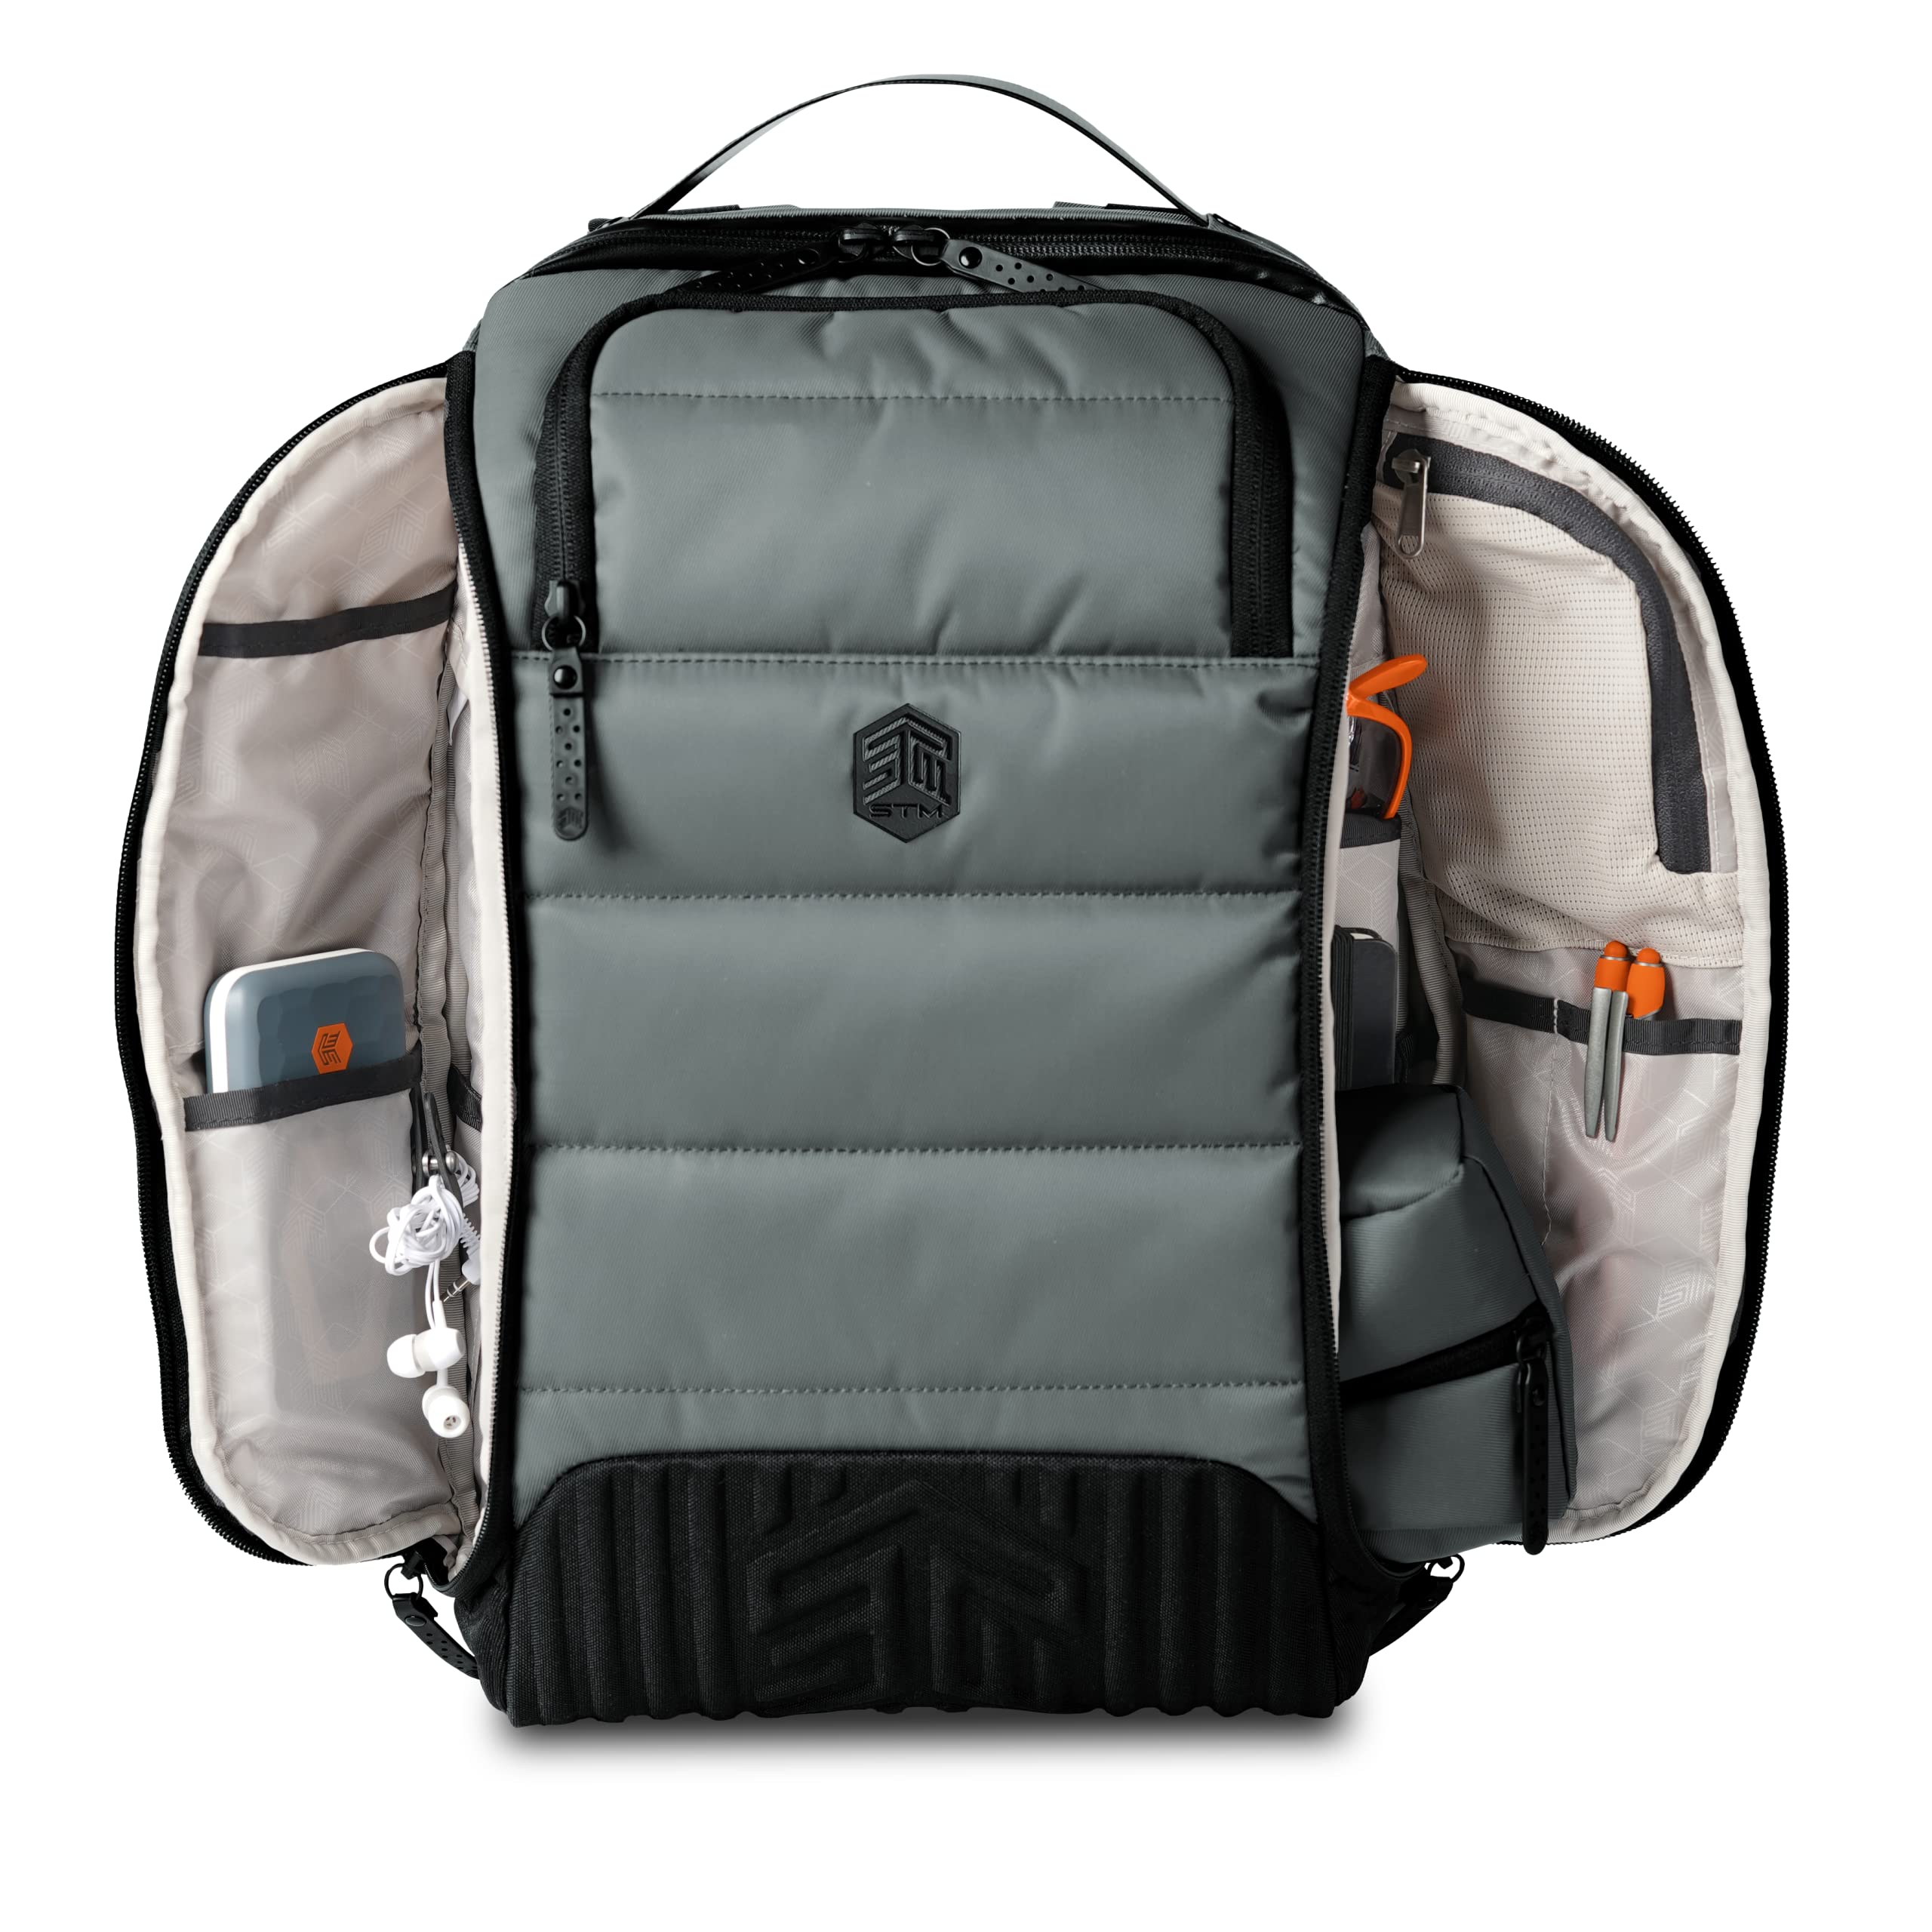 STM Dux 16L Backpack - Slim, Rugged, Comfortable, Innovative, Versatile, 360 Degree Protective Backpack for Men & Women, Fits up to a 16" Laptop Plus a Tablet Sleeve - Grey